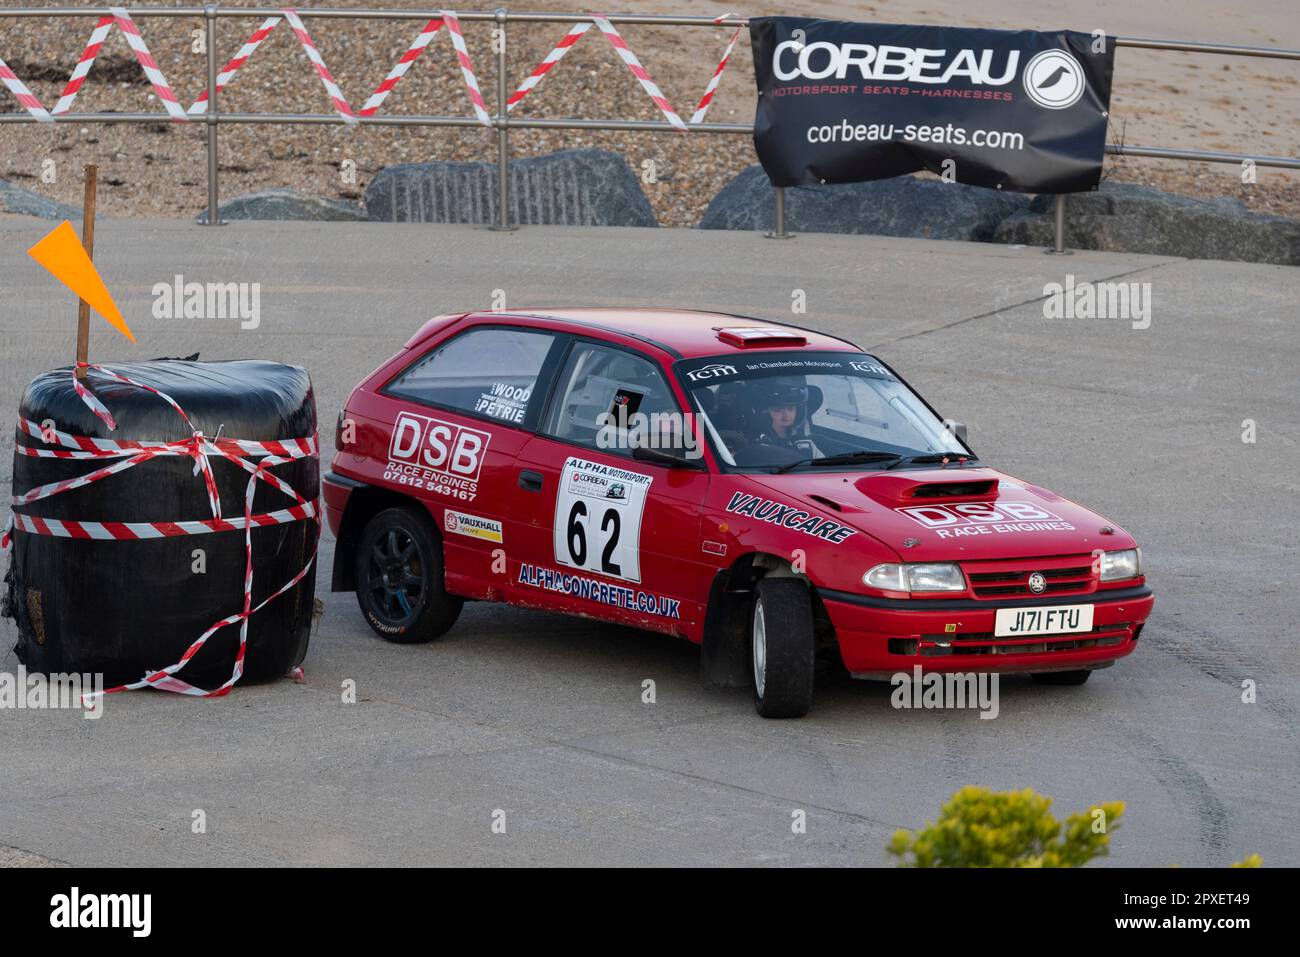 Matt Wood racing a classic 1991 Vauxhall Astra competing in the Corbeau Seats rally on the seafront at Clacton, Essex, UK. Co driver Dan Petrie Stock Photo